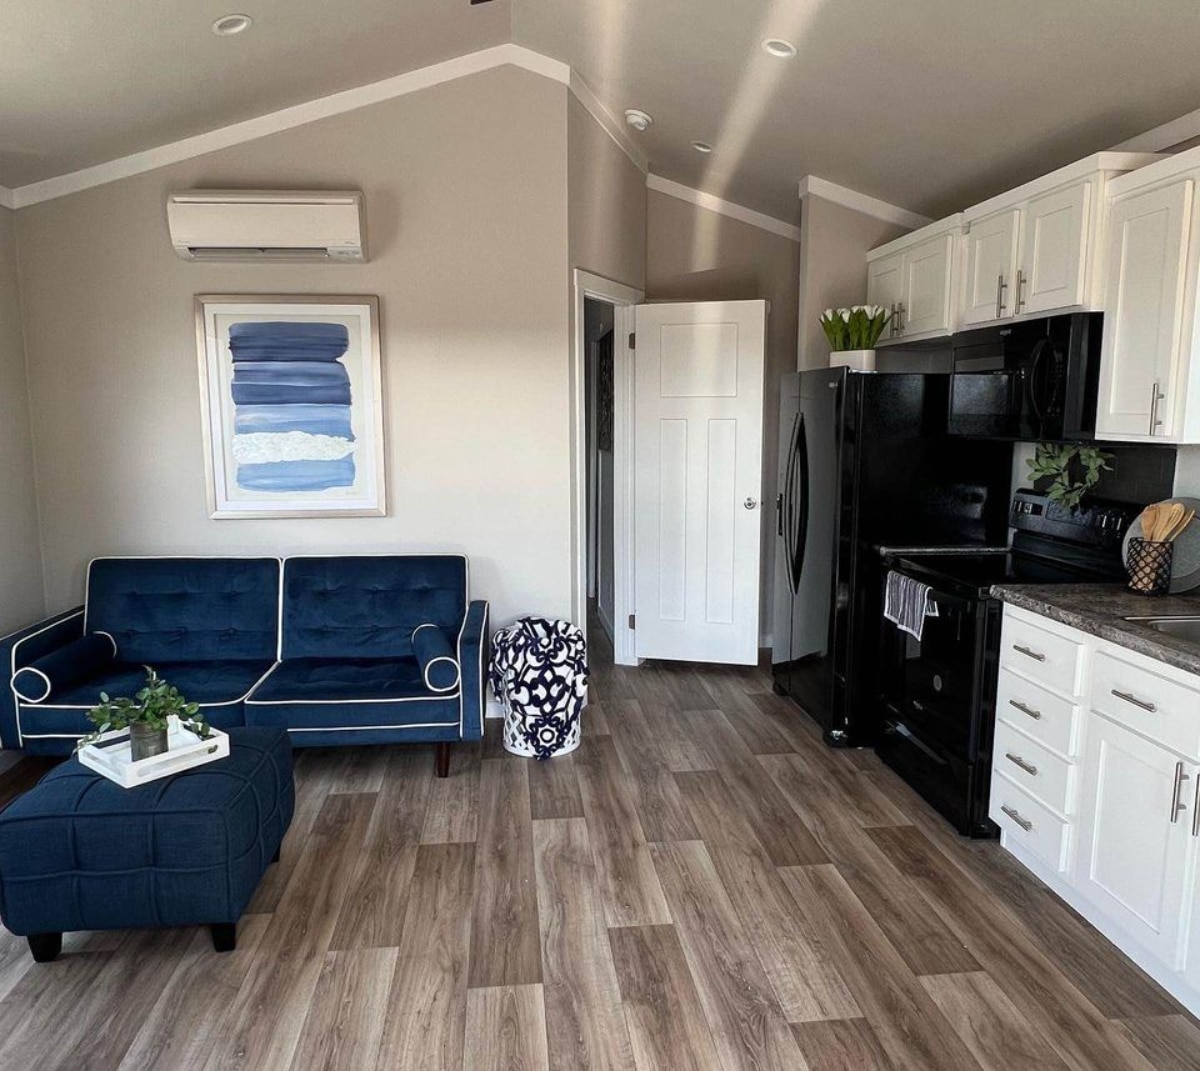 Interiors of 32' Ranch Style Tiny Home